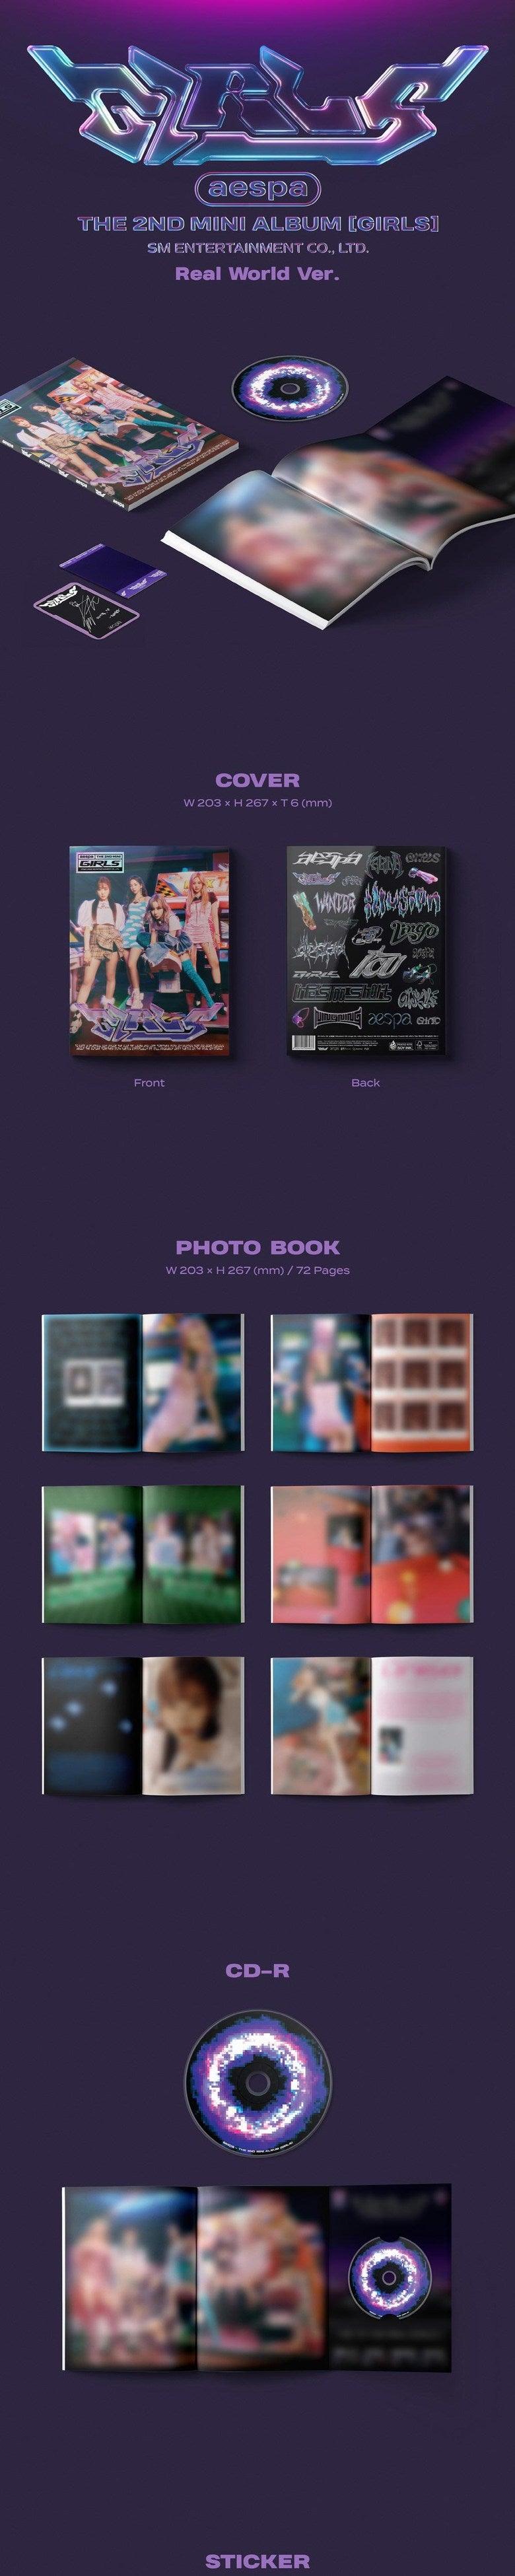 [Pre-order] AesPa 2nd Mini ALBUM (REAL WORLD)ver. - Shopping Around the World with Goodsnjoy